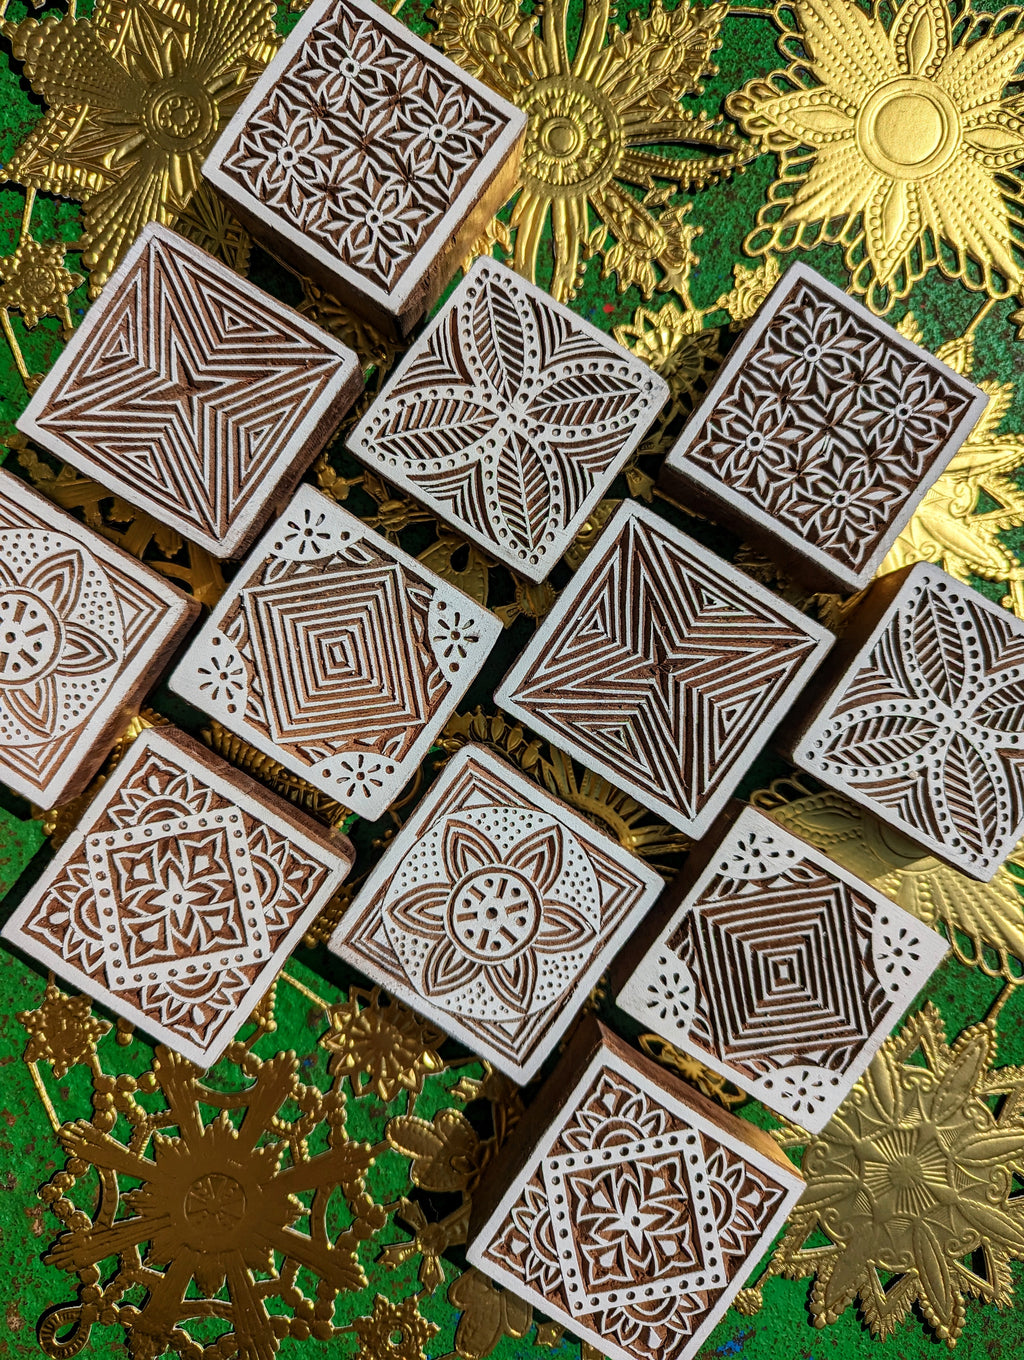 Just like our favorite cement tiles!

Beautiful hand carved Indian wood blocks, made from sustainable mango wood. Traditionally used for printing on fabric.

5 x 5cm

